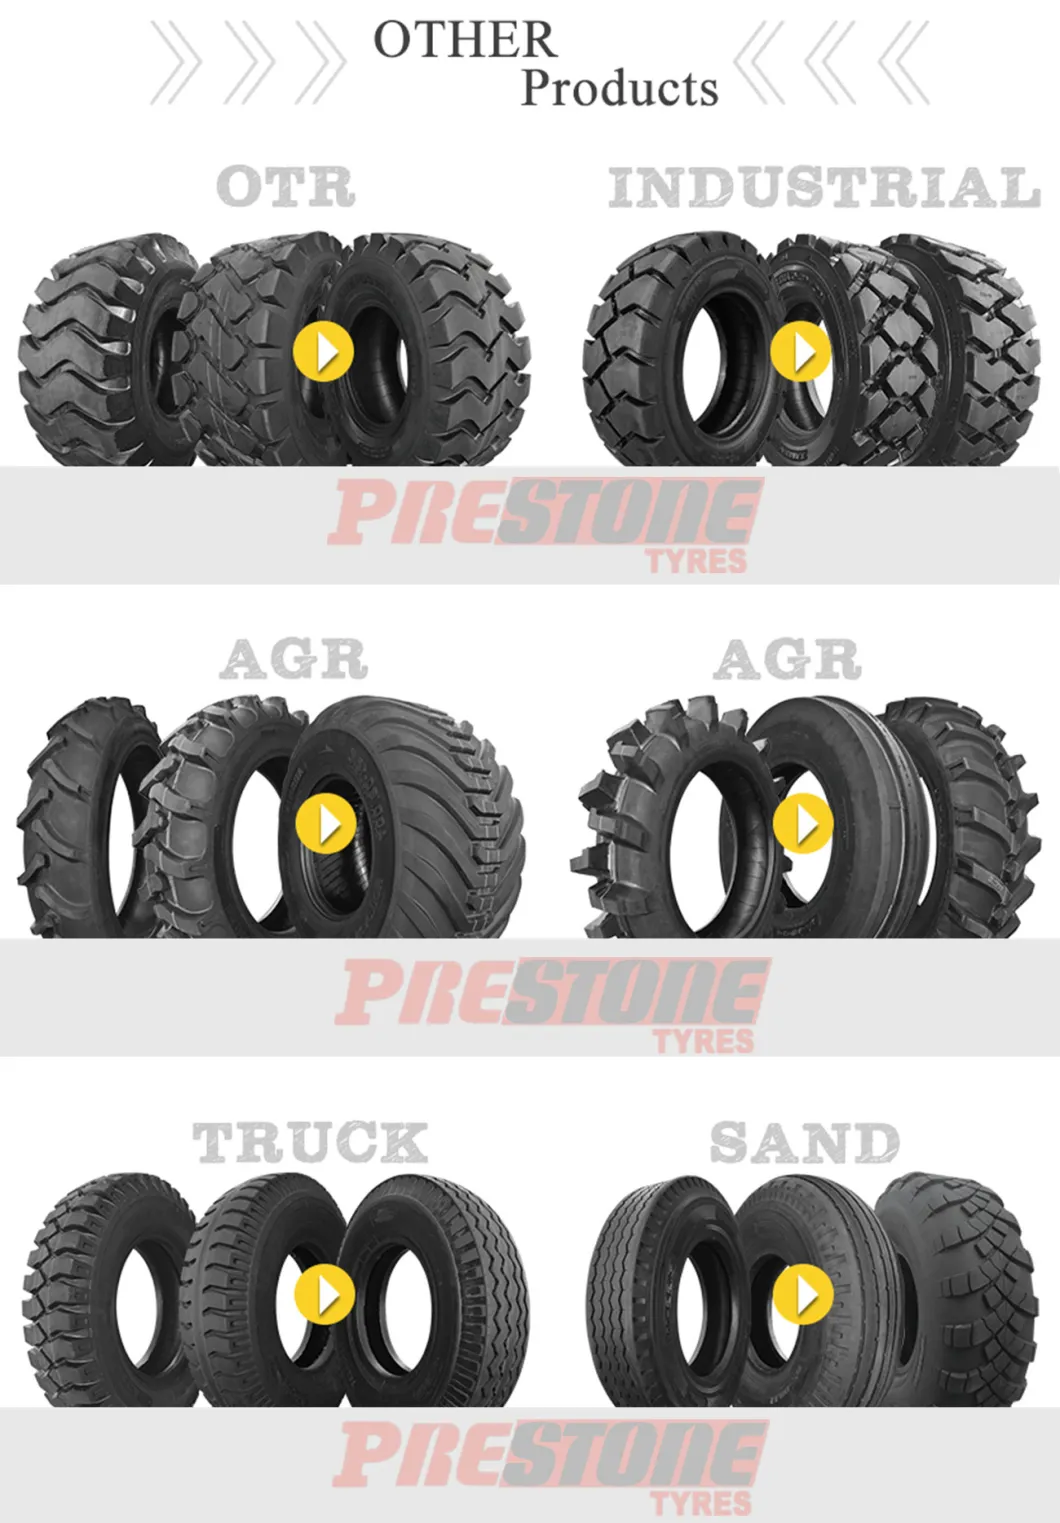 Pr-1 Agr Farm Tractor Agricultural Paddy Field Rubber Bias Tyre 9.00-20 9.5-20 9.5-24 11.2-24 11-32 12.4-28 13.6-38 14.9-30 16.9-34